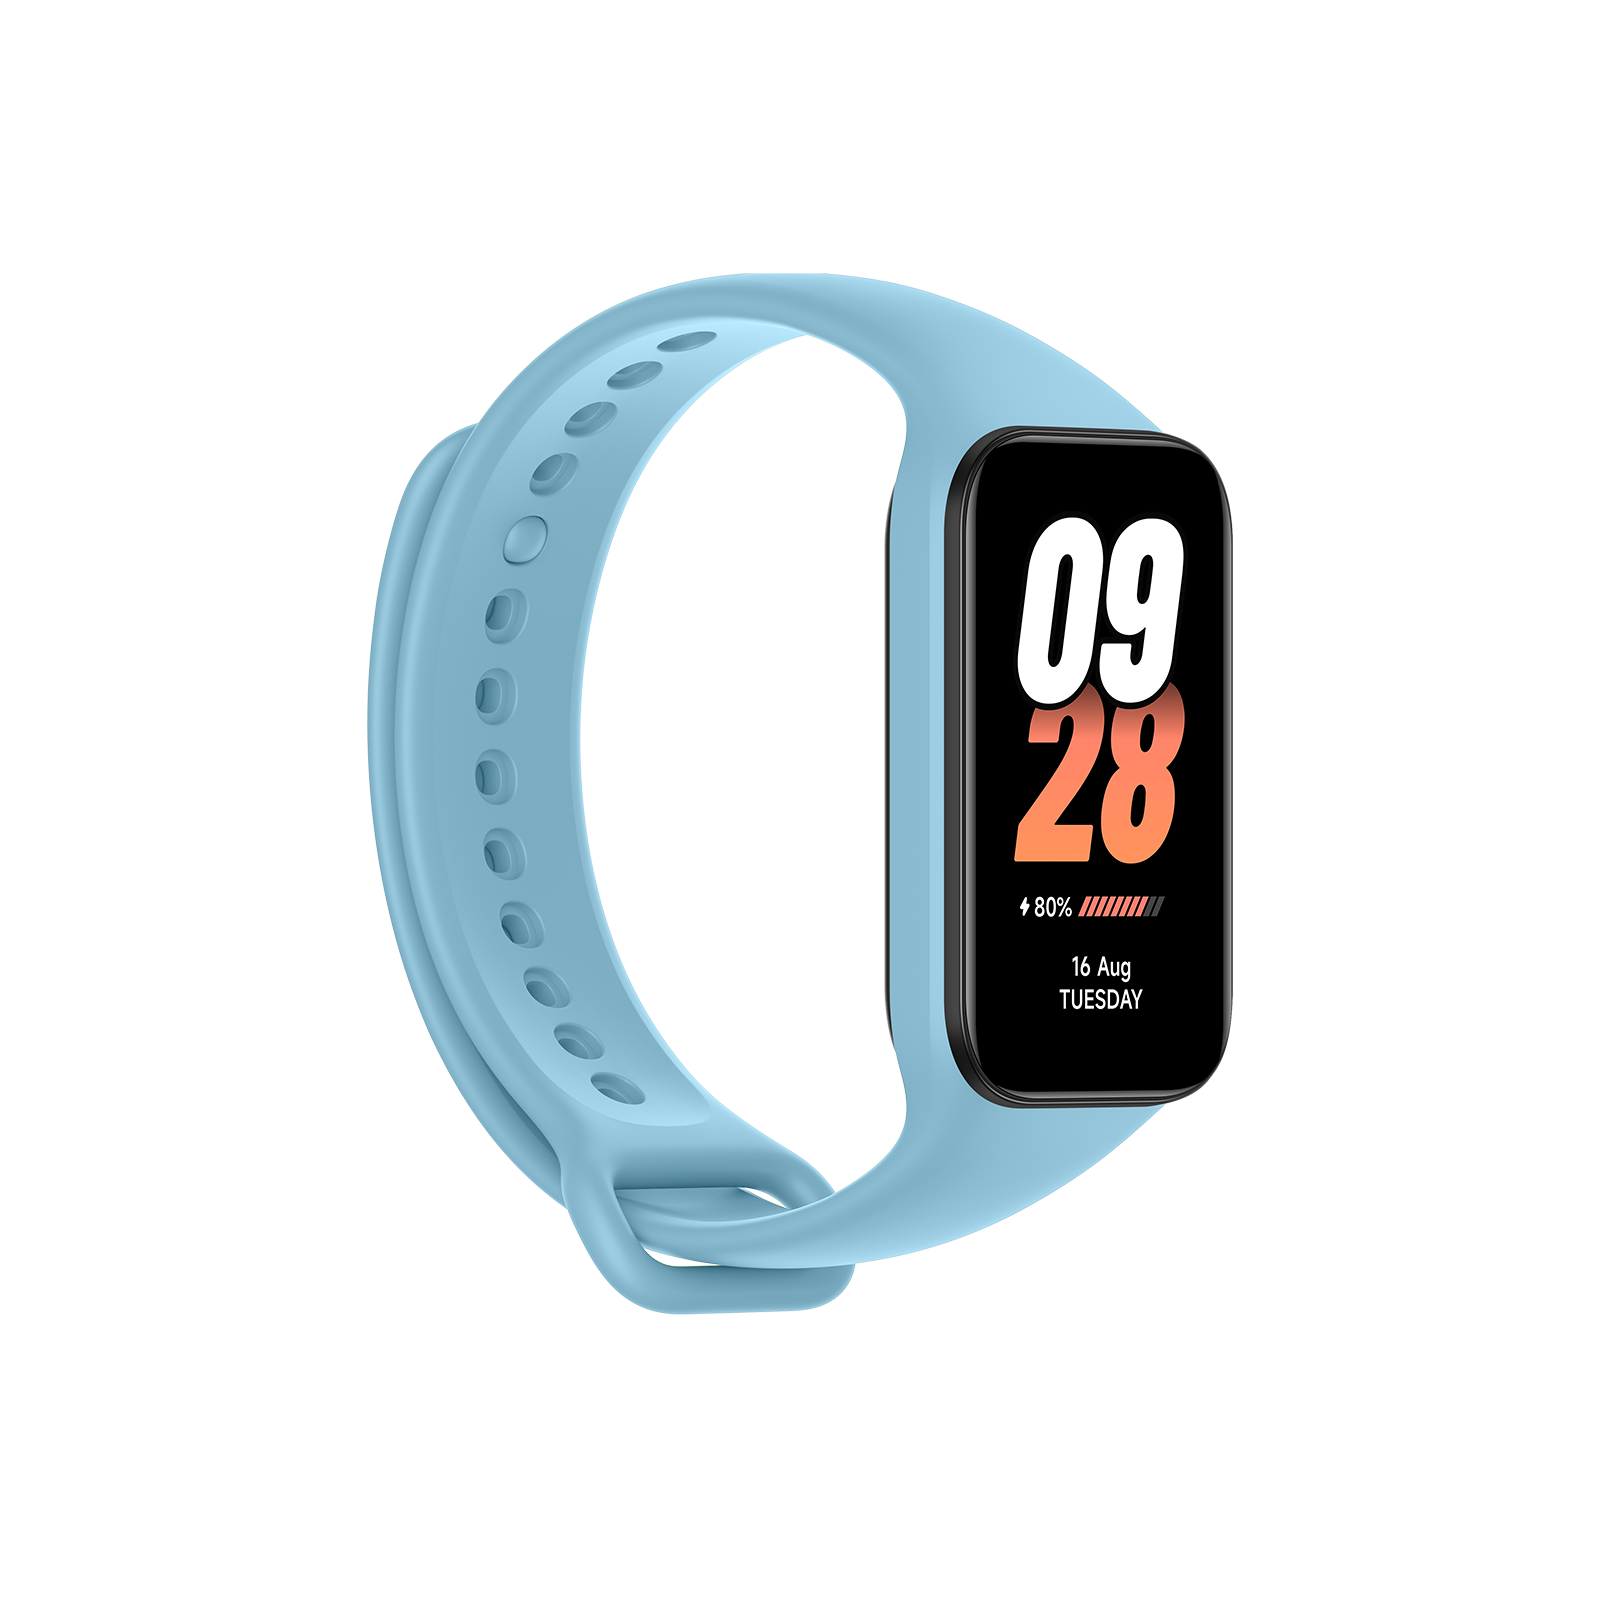 xiaomi-smart-band-8-active-strap - Specifications - Xiaomi UK